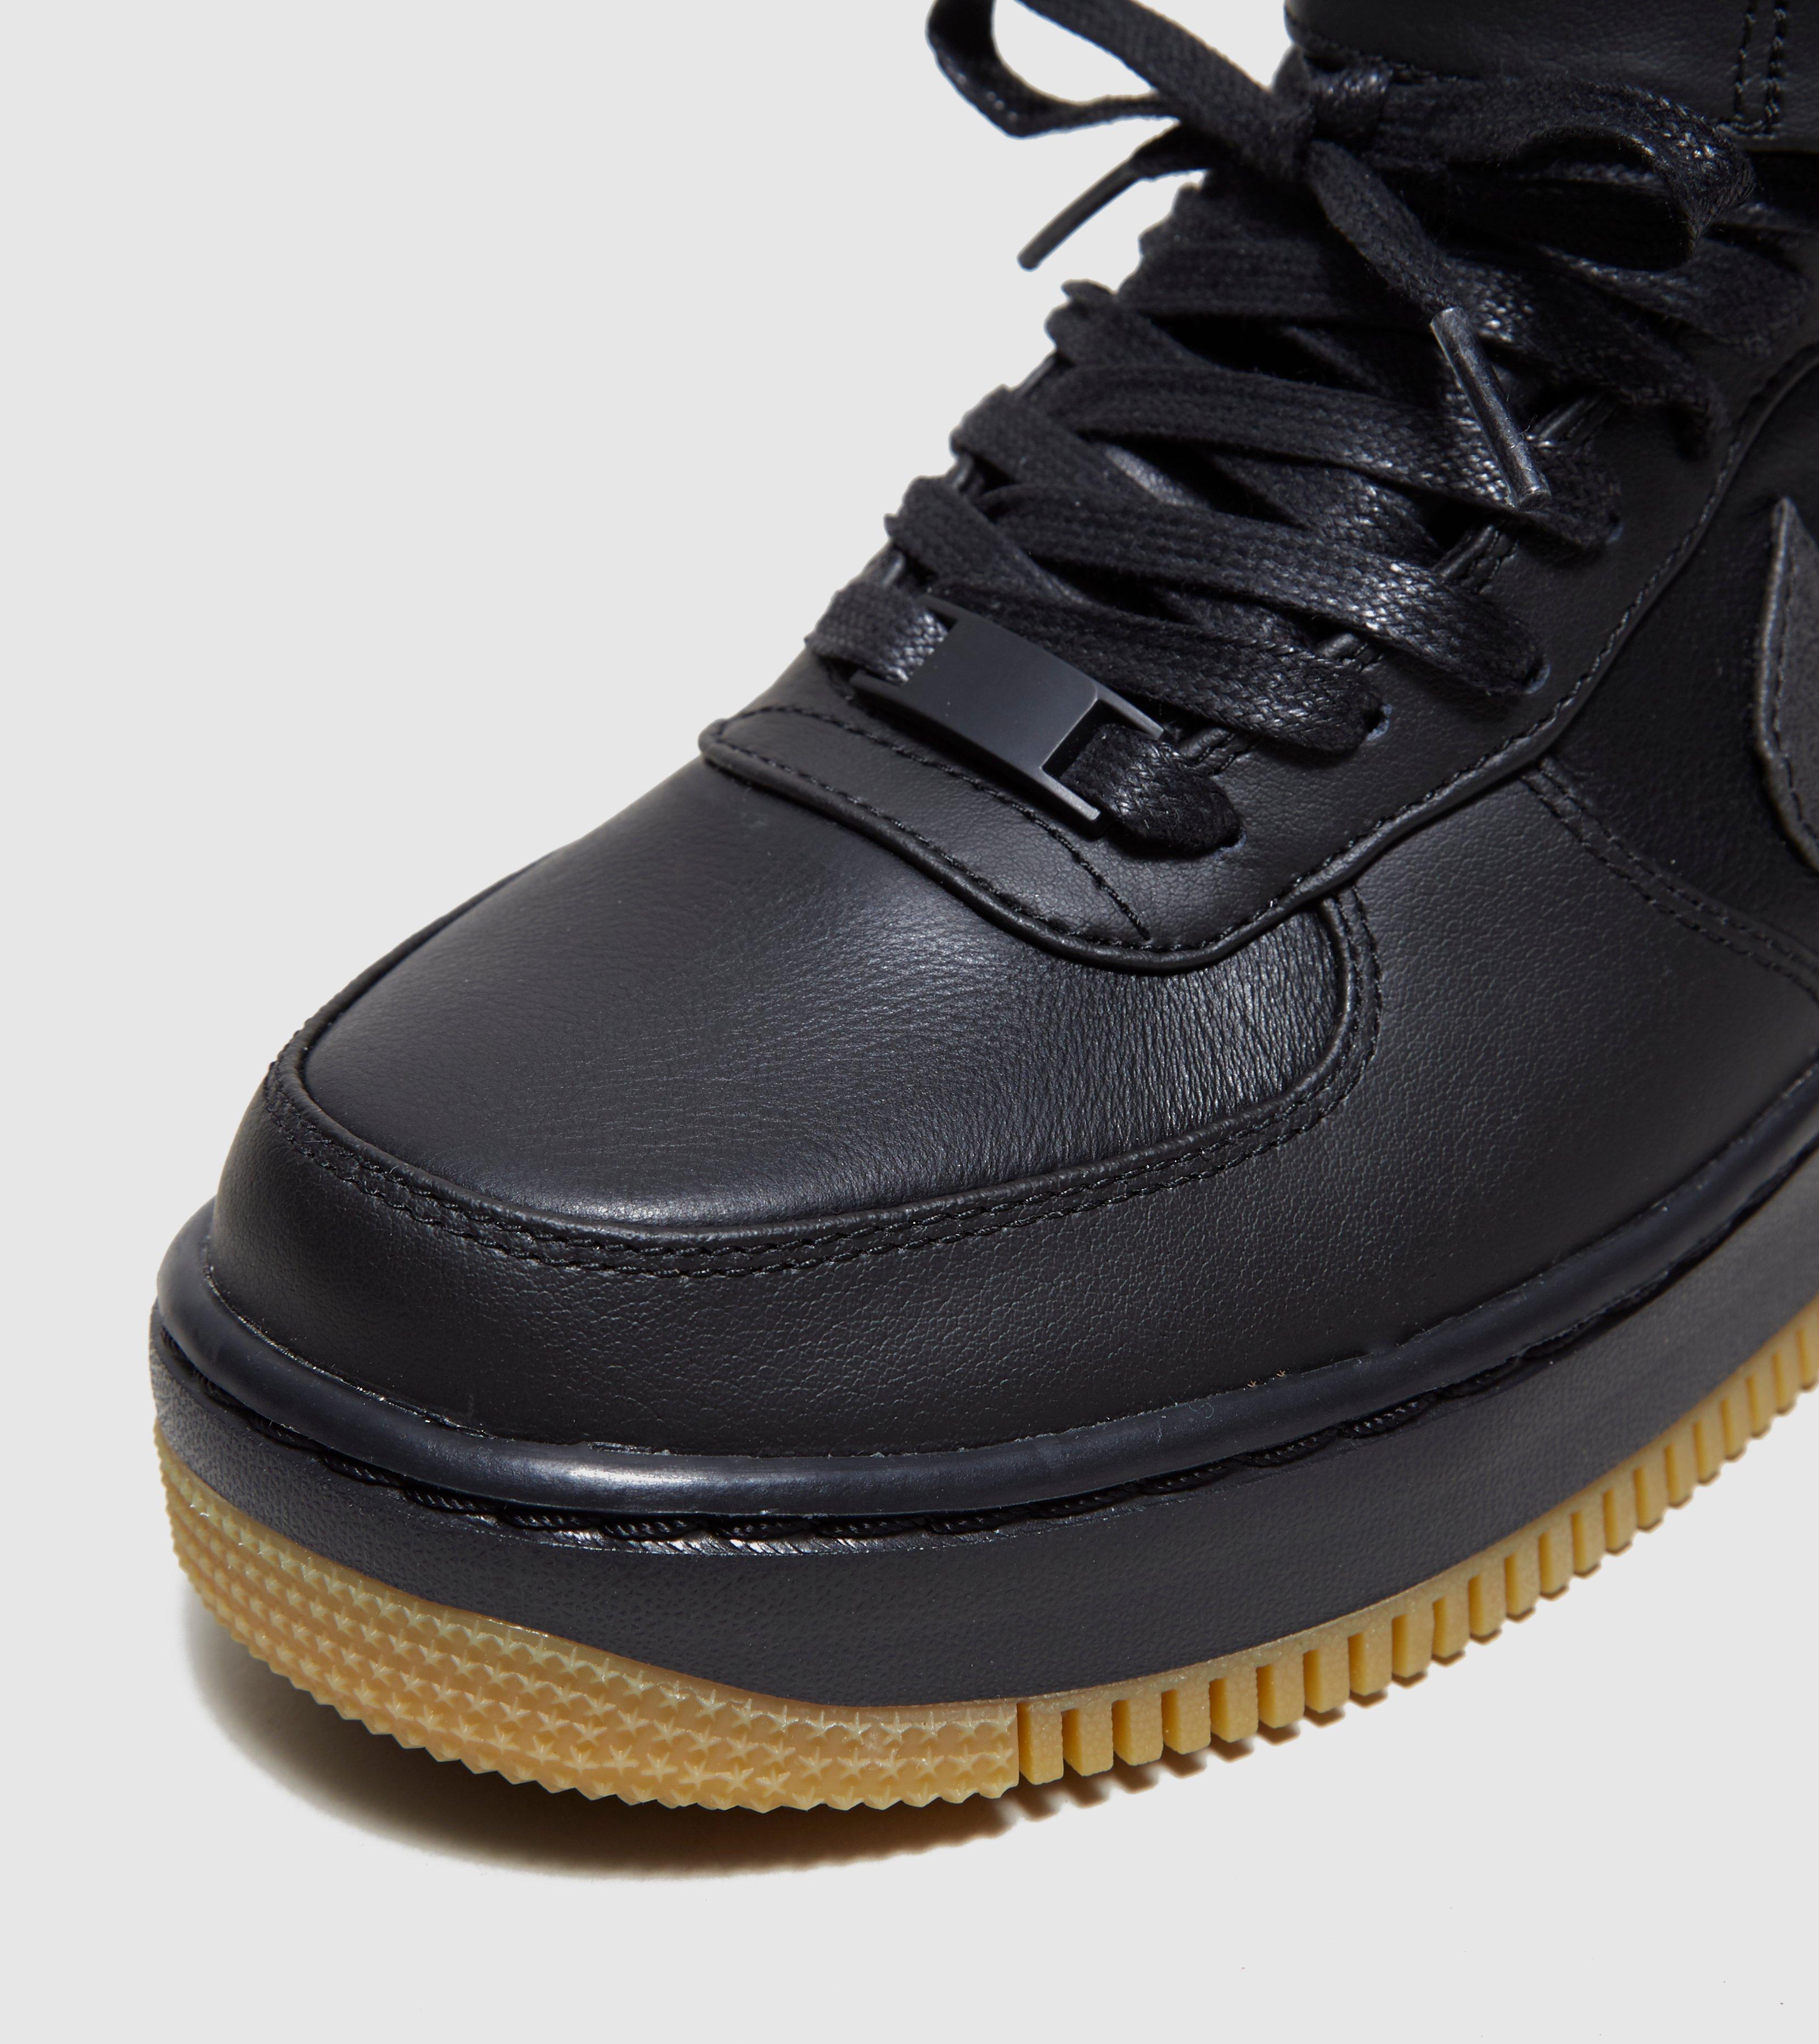 Lyst - Nike Upstep Warrior Leather Sneaker Boots in Black